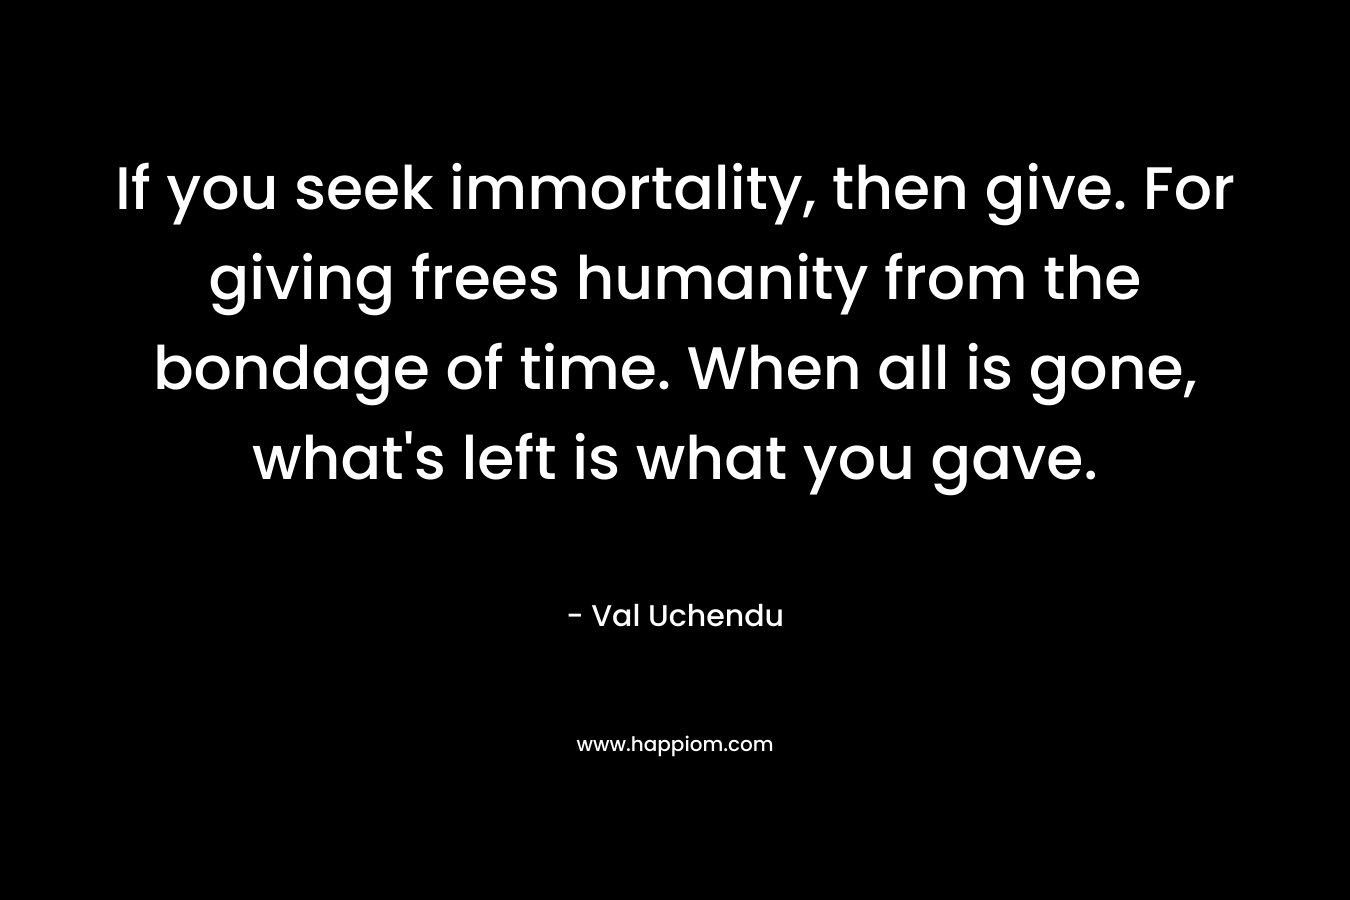 If you seek immortality, then give. For giving frees humanity from the bondage of time. When all is gone, what’s left is what you gave. – Val Uchendu